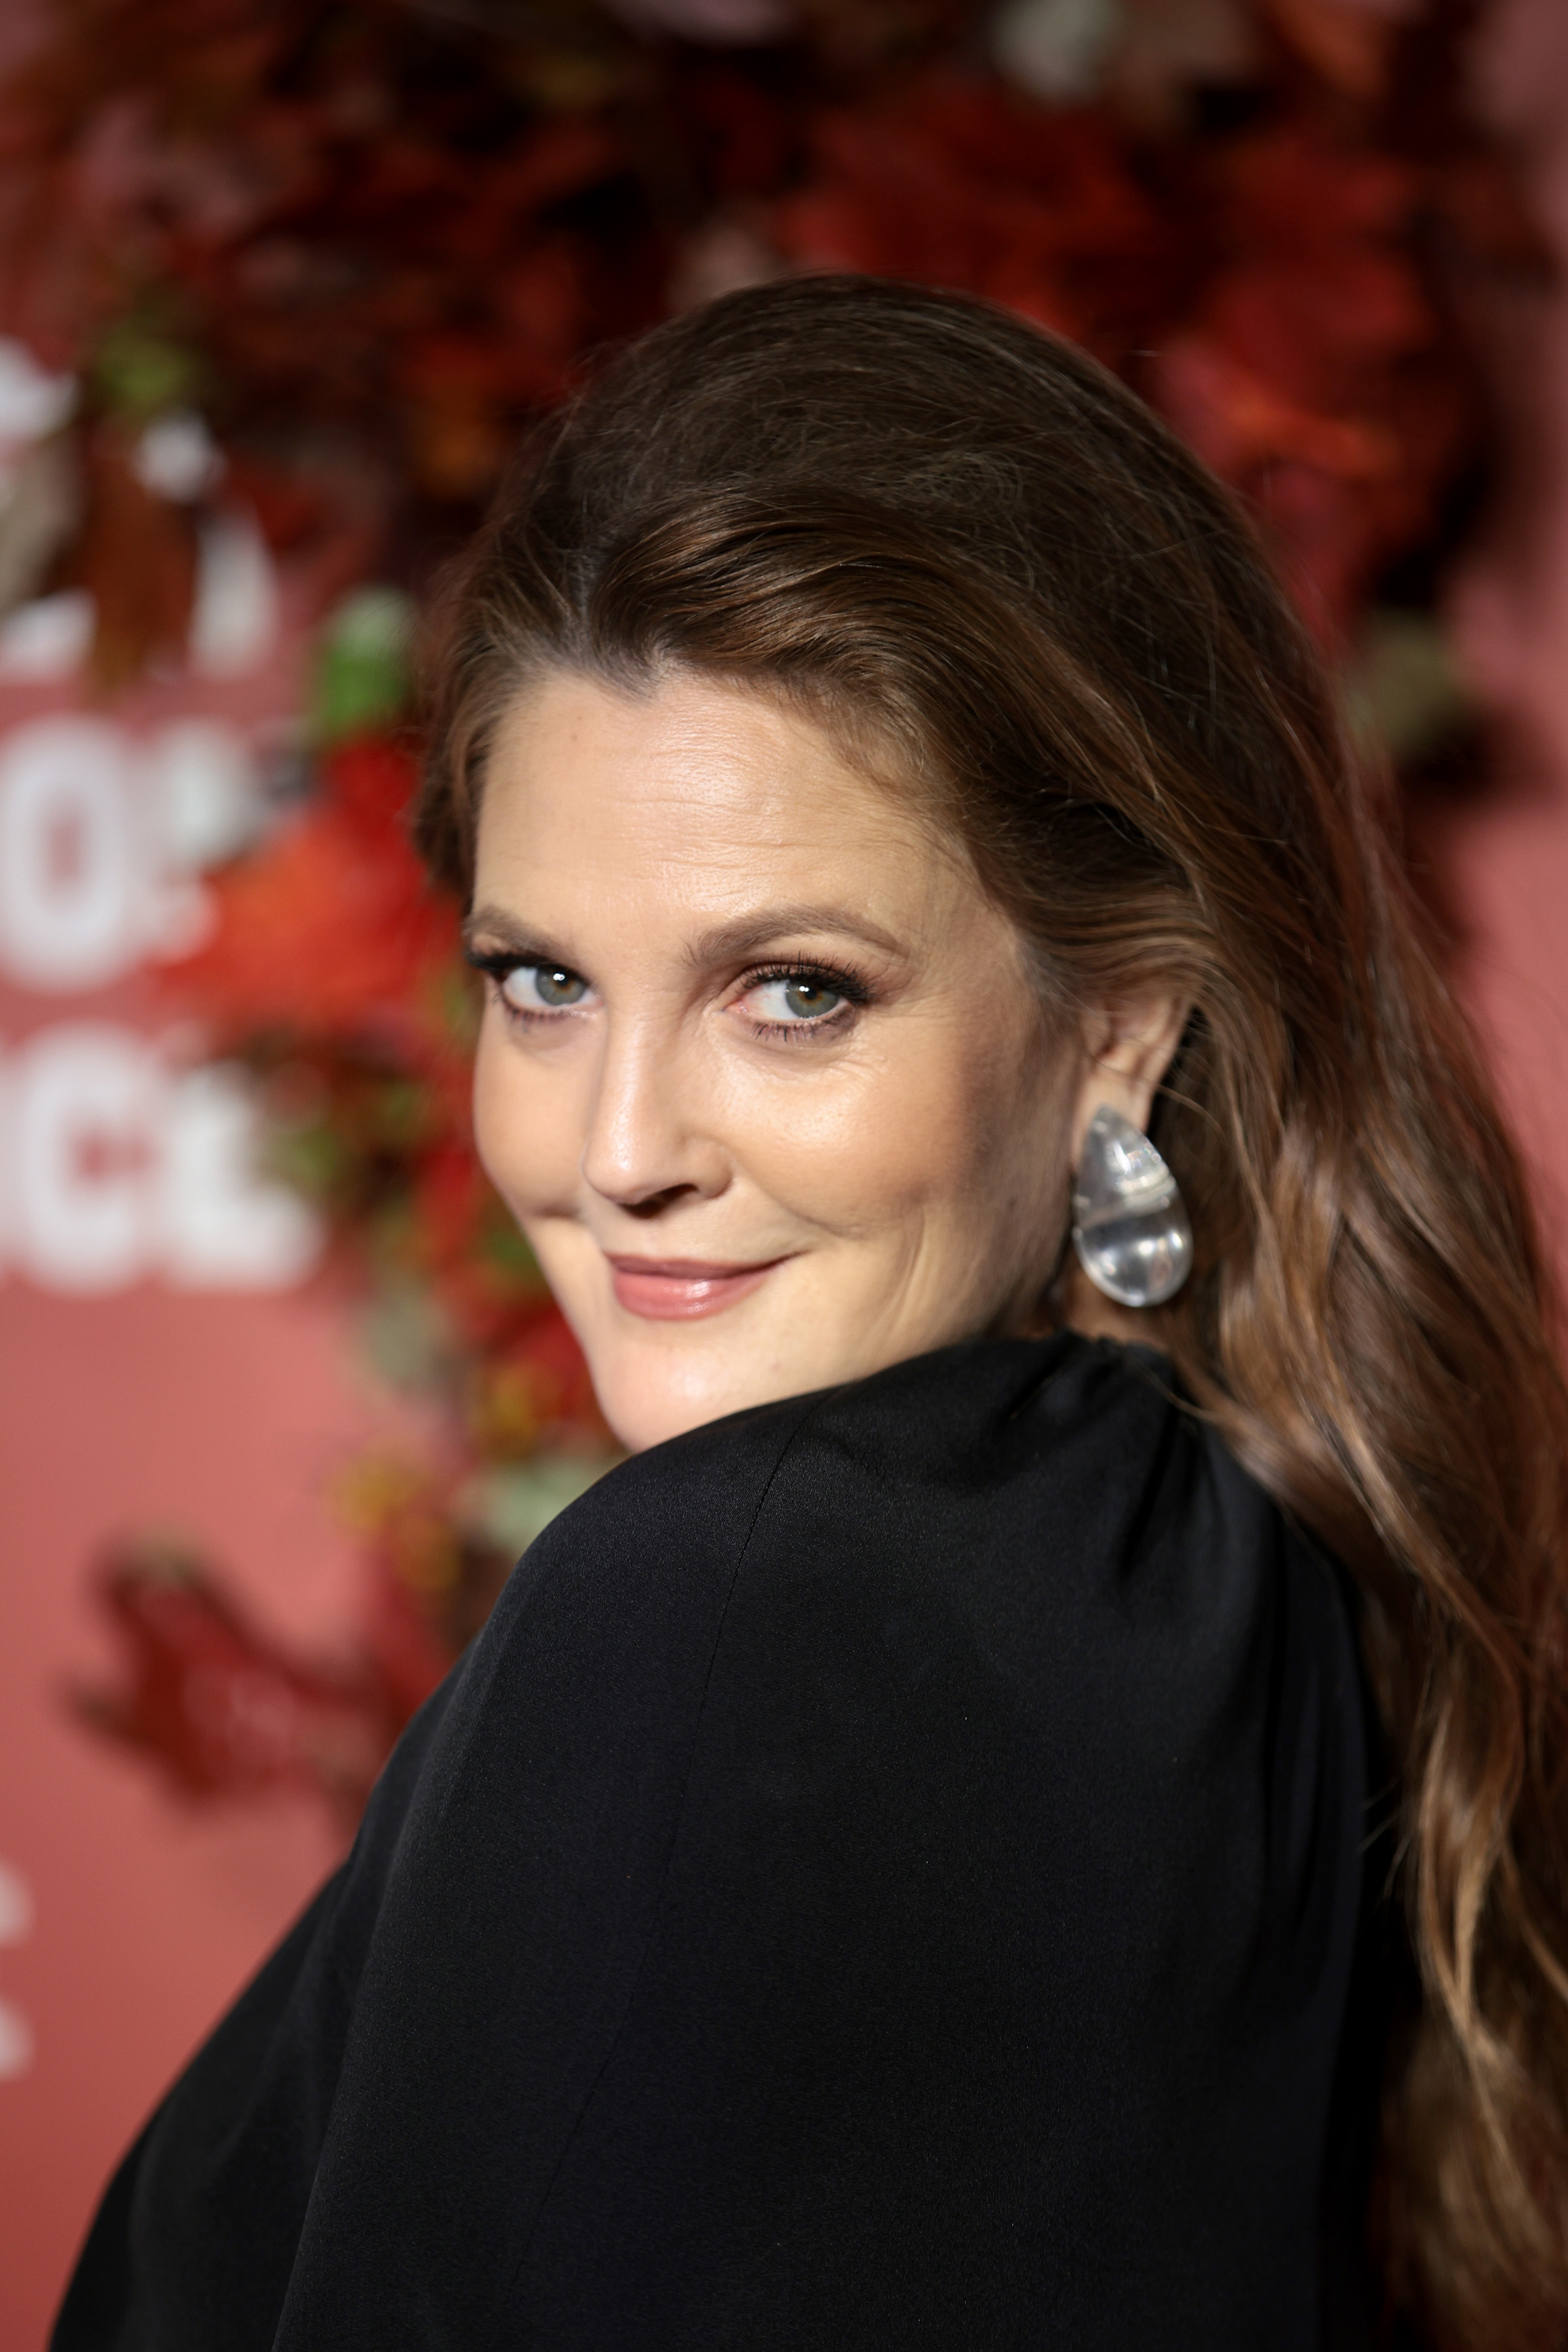 Drew Barrymore attends the Clooney Foundation For Justice Inaugural Albie Awards on September 29, 2022 in New York City. | Source: Getty Images